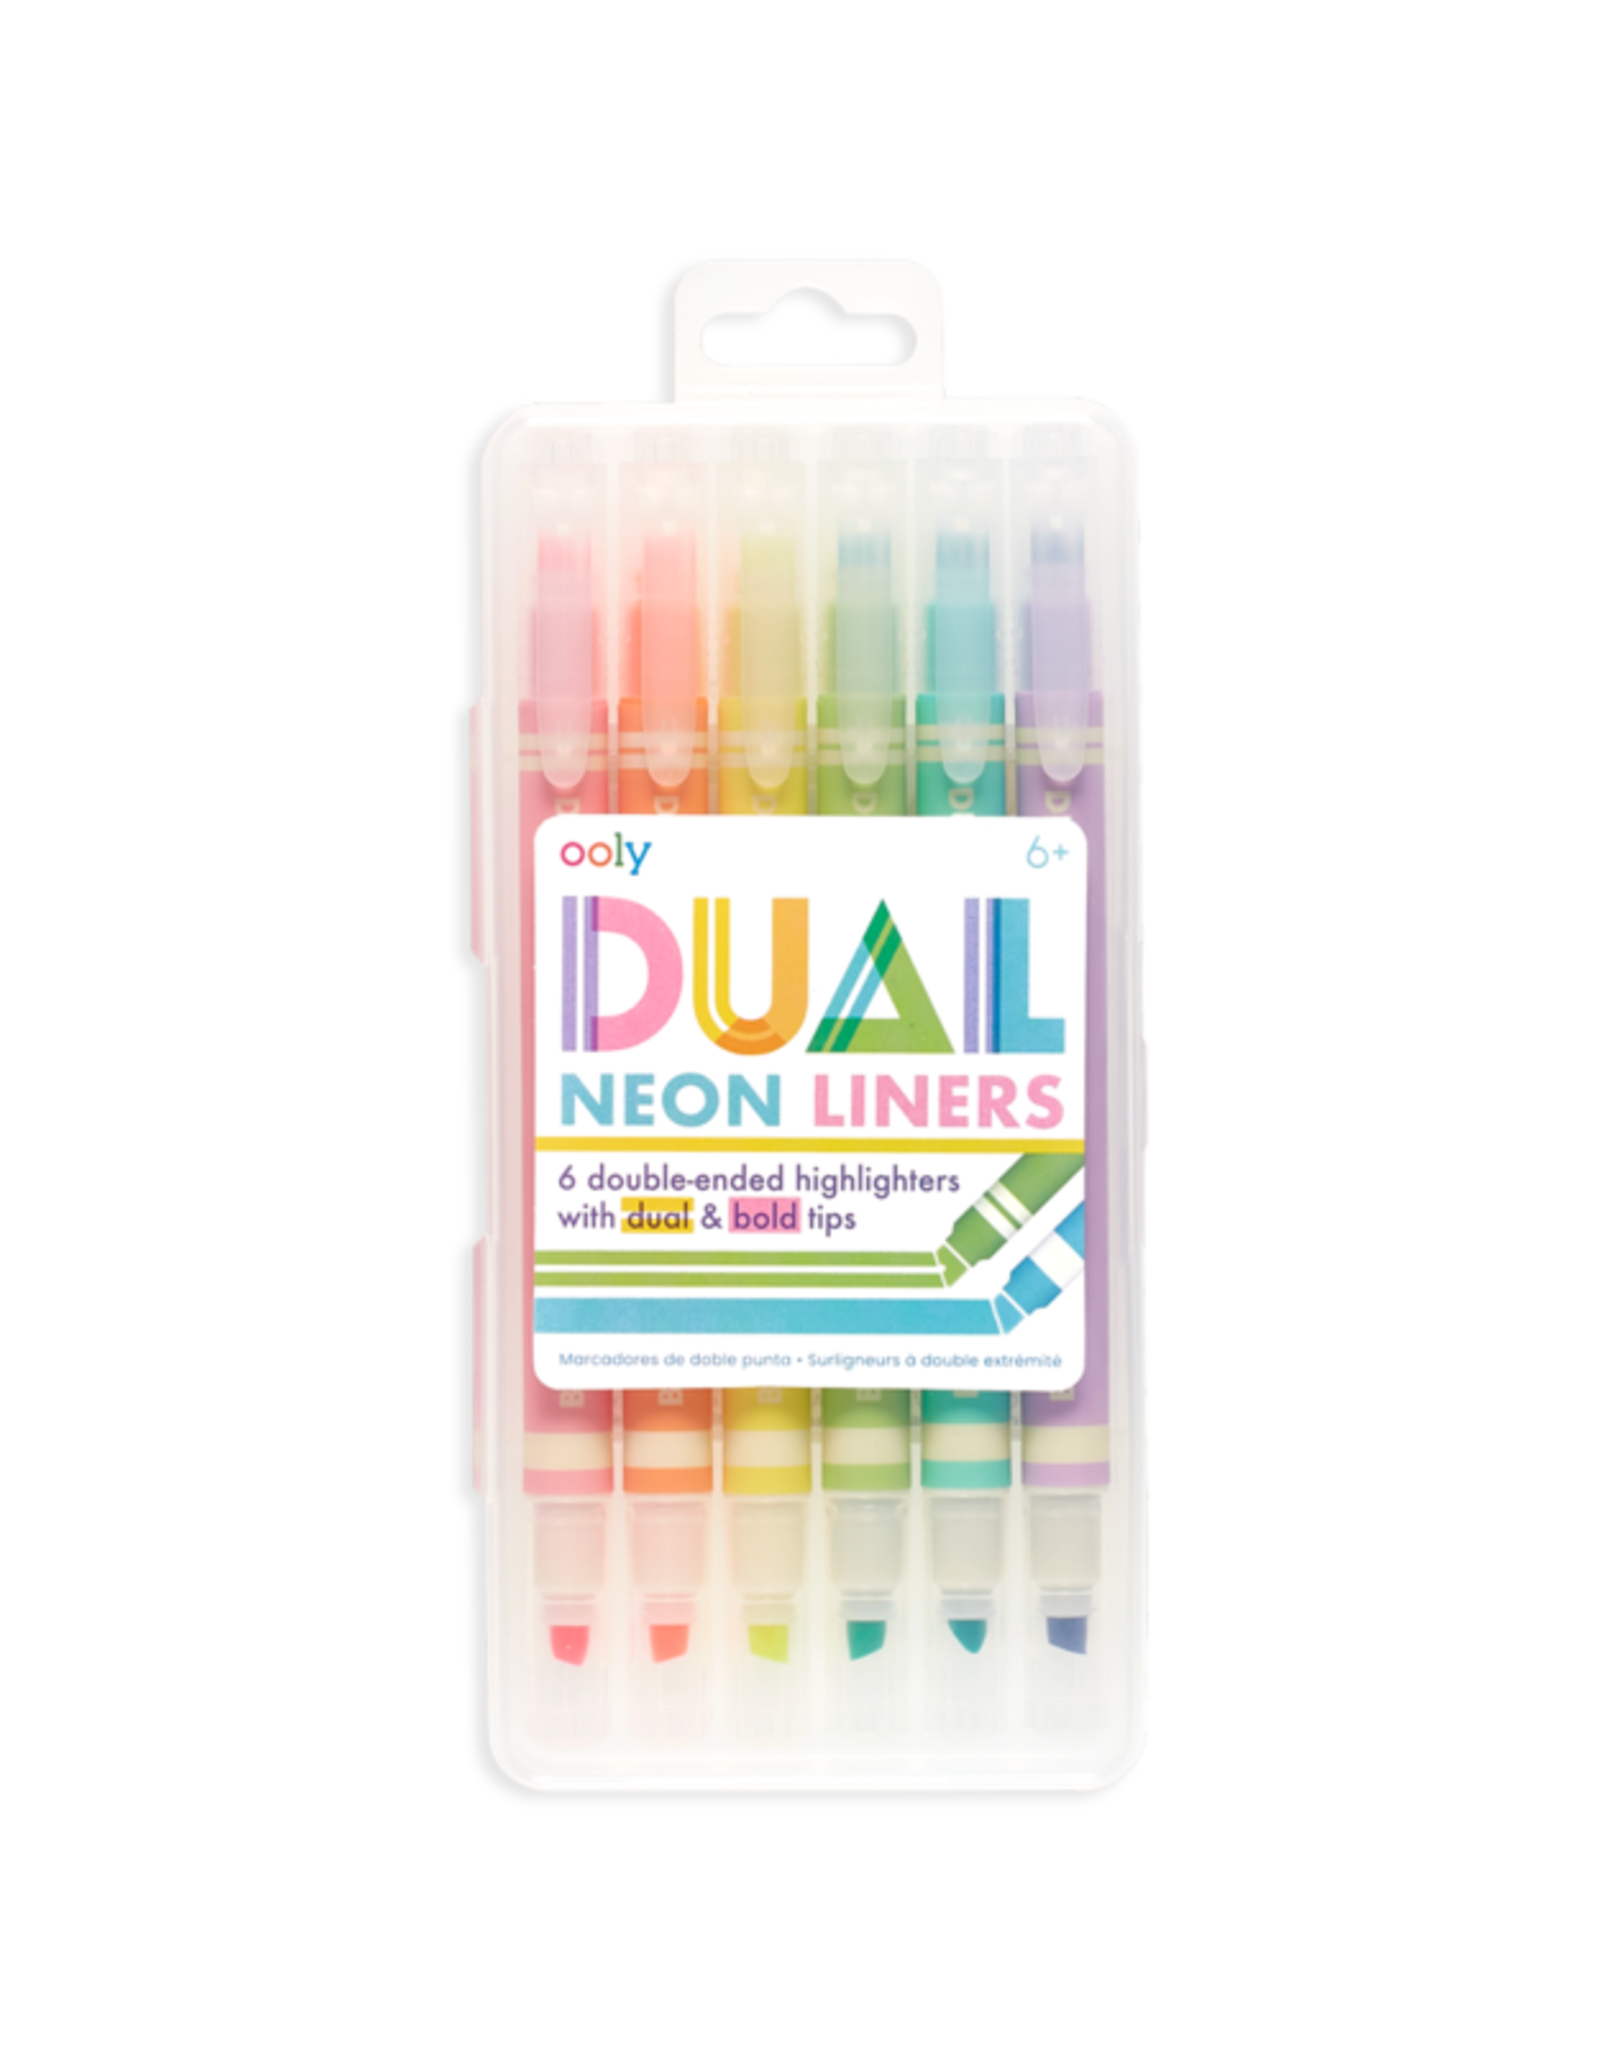 OOLY DUAL LINER DOUBLE ENDED NEON HIGHLIGHTERS - SET OF 6